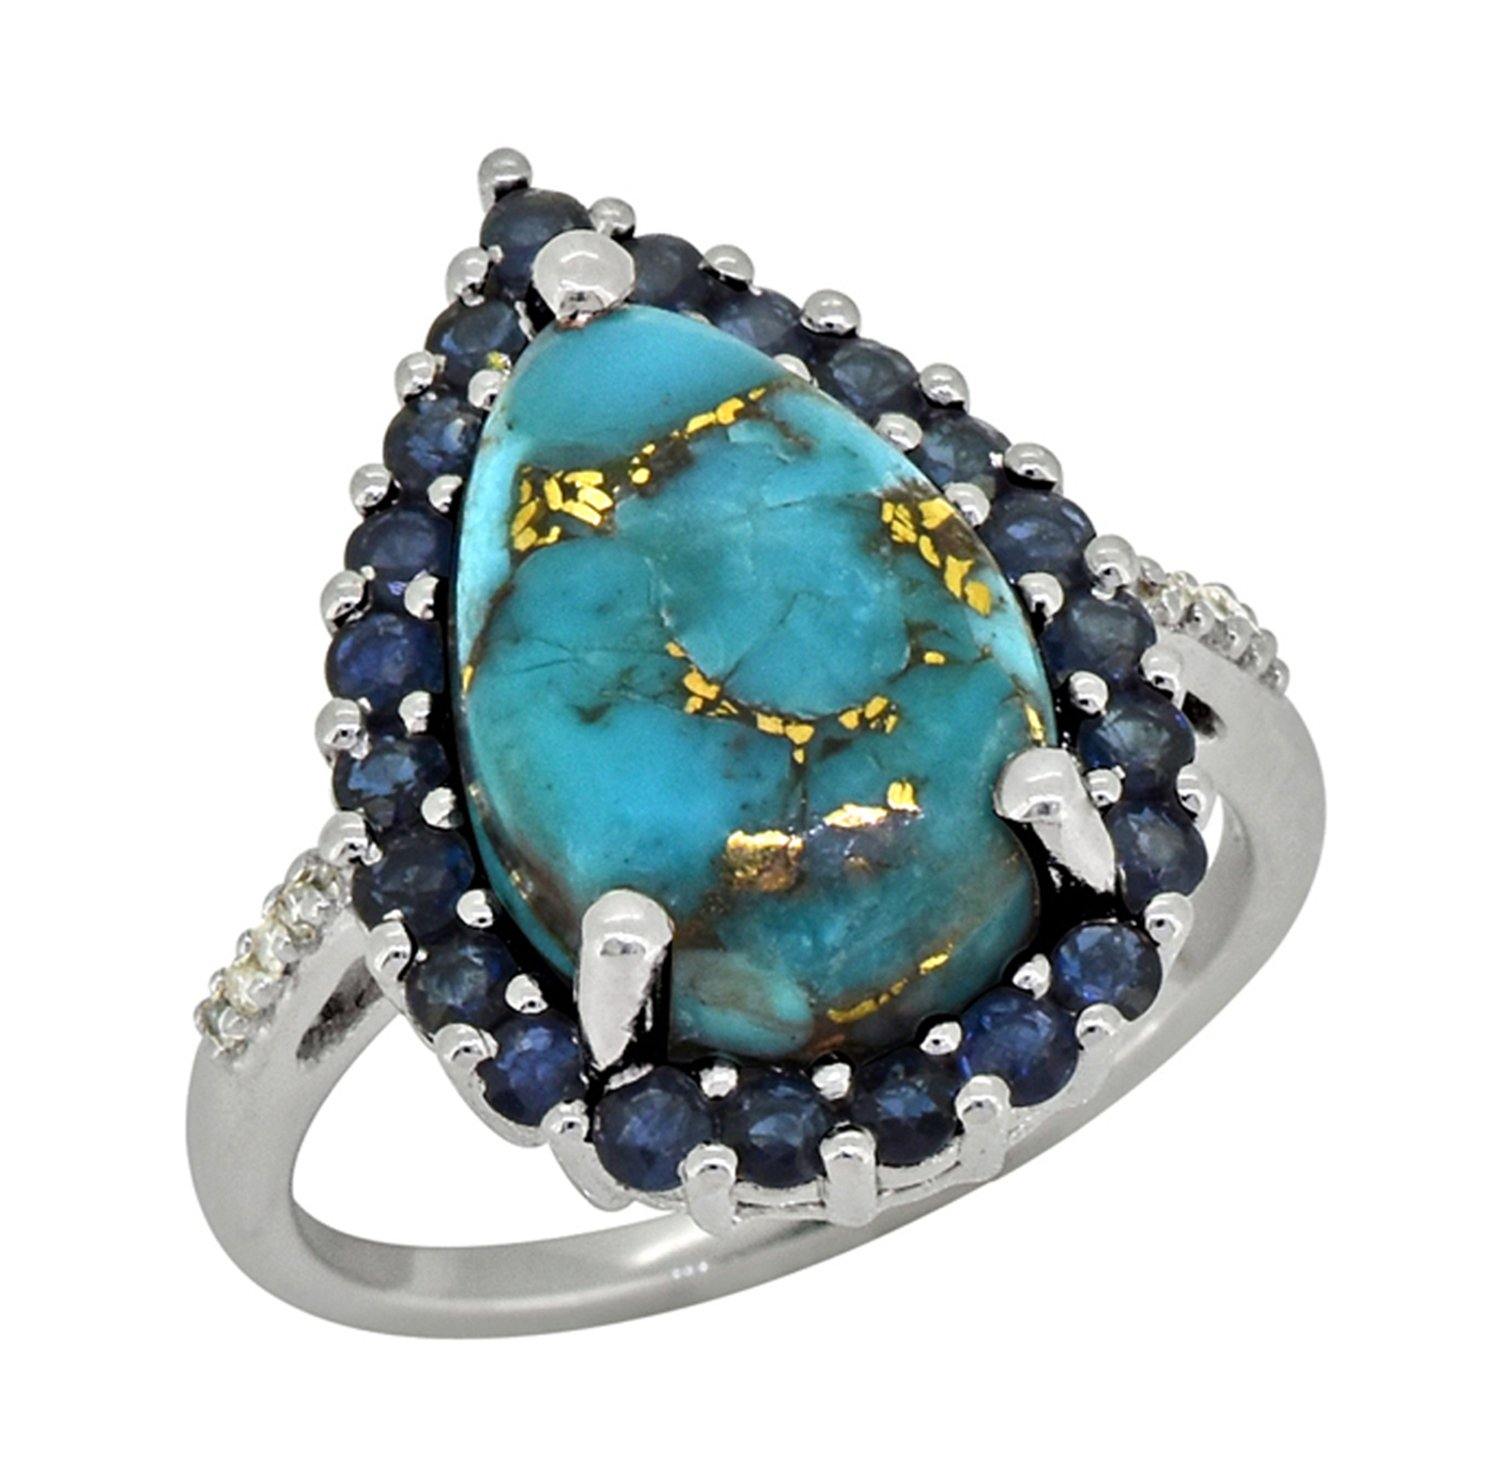 7.47 Ct Turquoise Blue Sapphire Solid 925 Sterling Silver Designer Ring Jewelry - YoTreasure